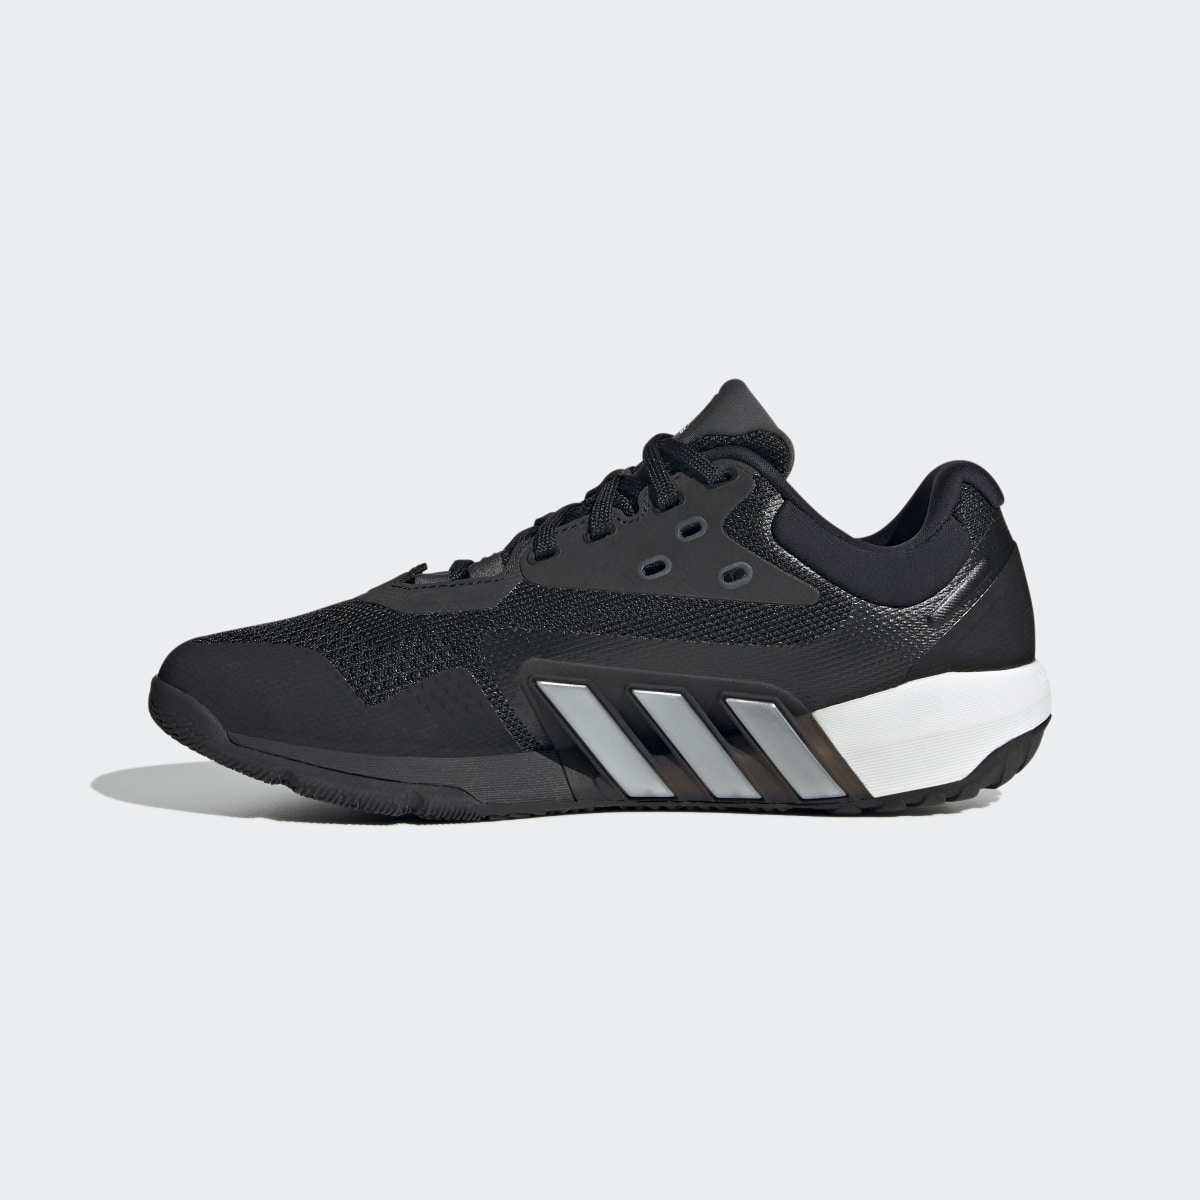 Adidas Dropset Trainer Shoes. 10